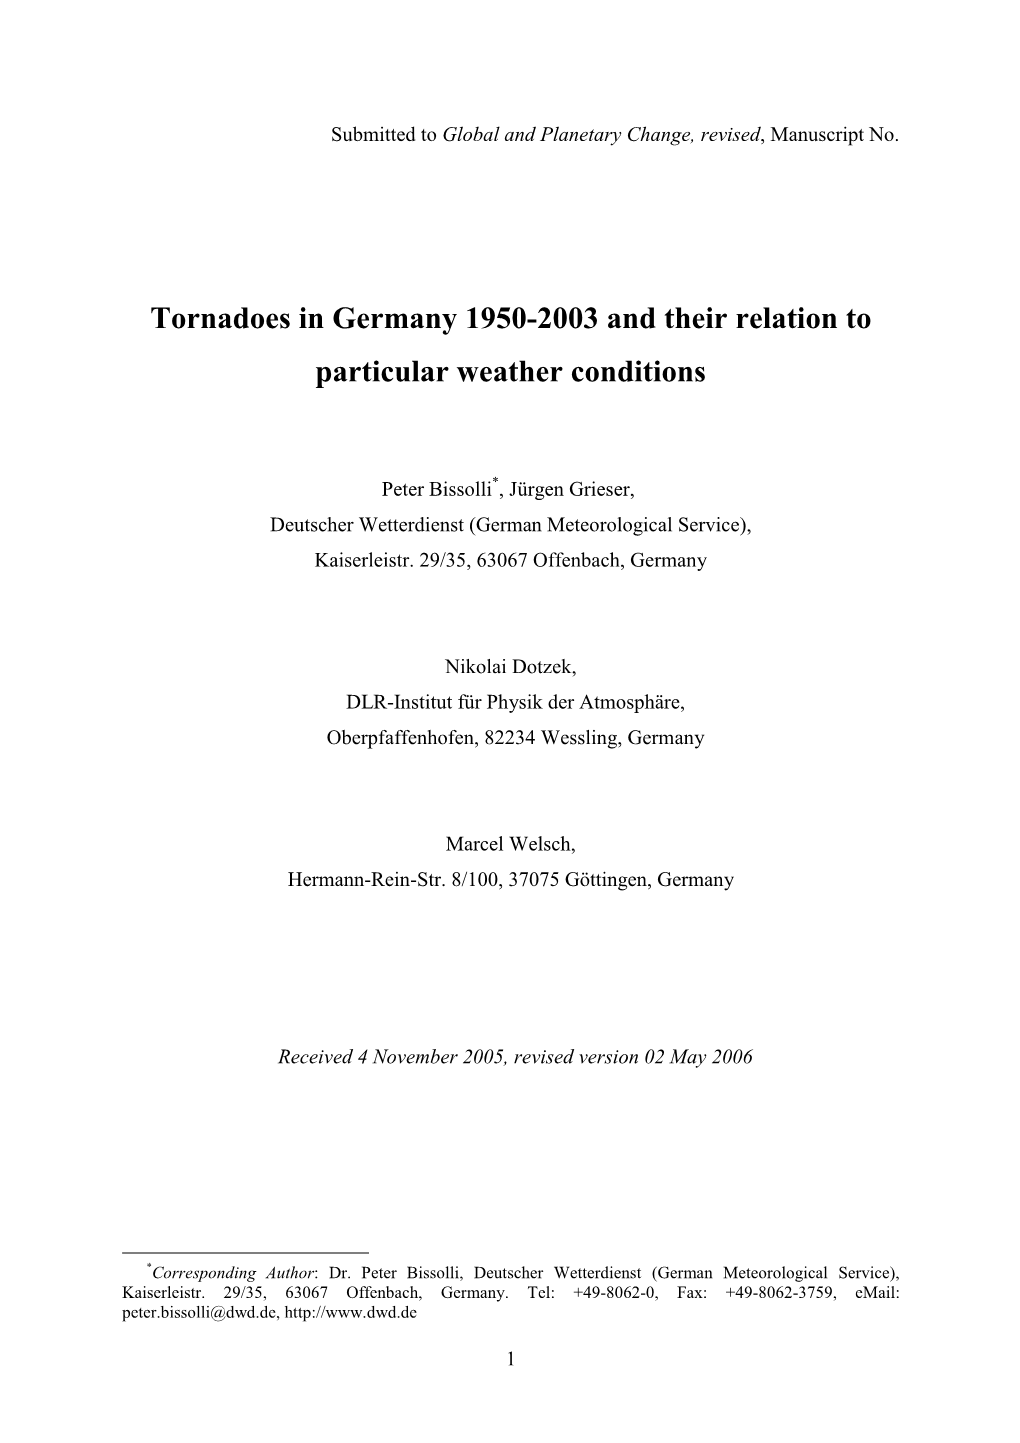 Tornadoes in Germany 1950-2003 and Their Relation to Particular Weather Conditions